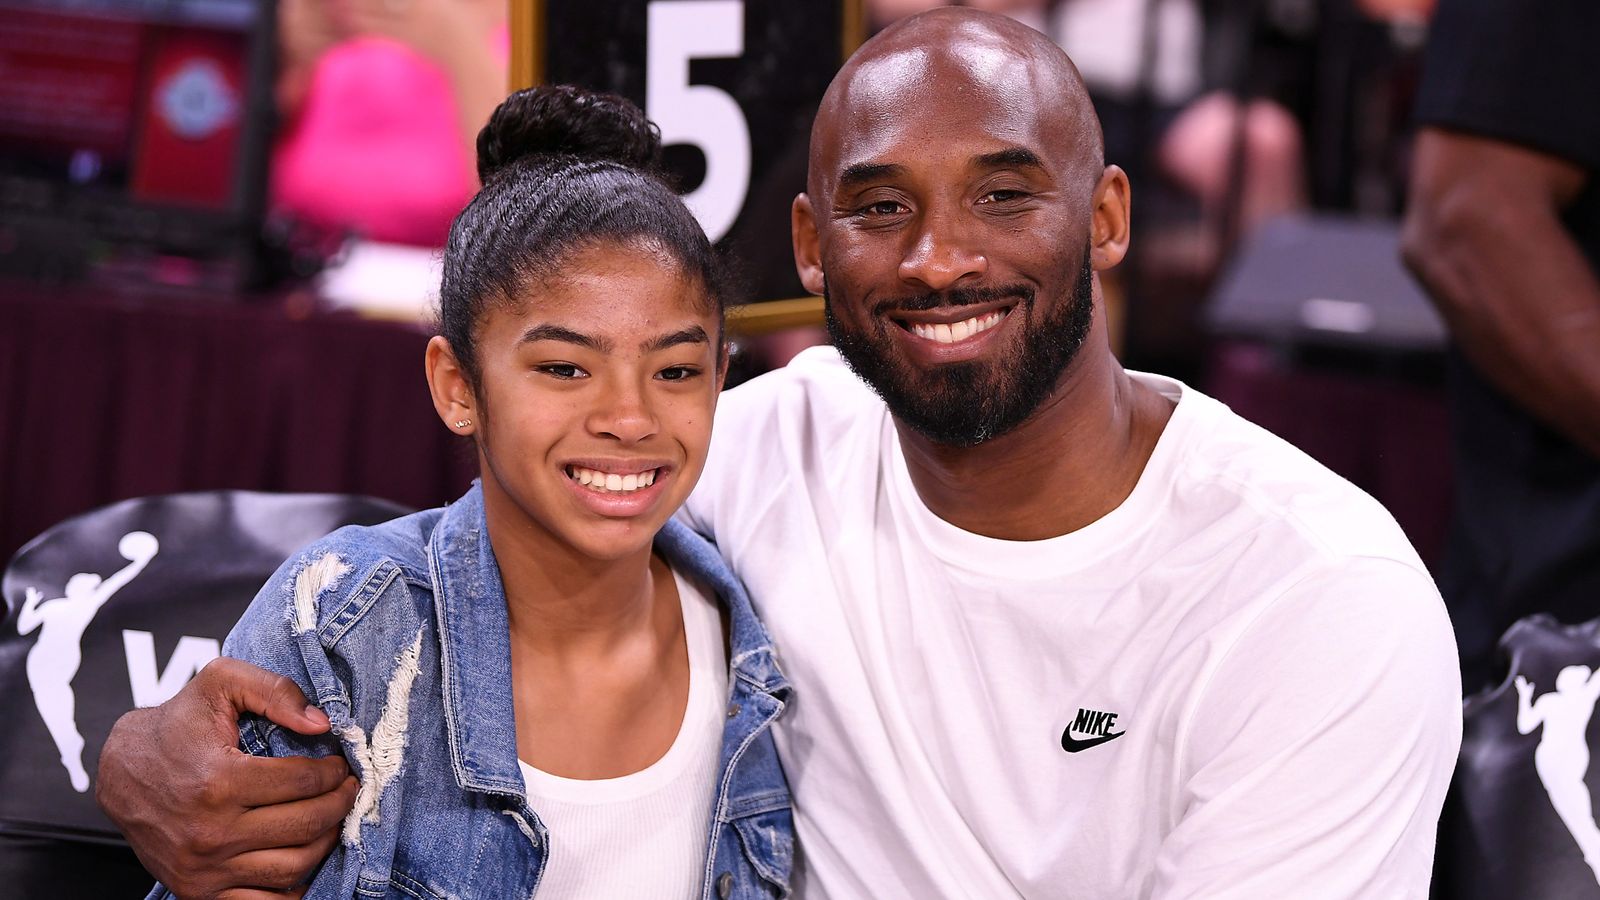 Kobe Bryant: NBA legend and teenage daughter killed in helicopter crash, World News